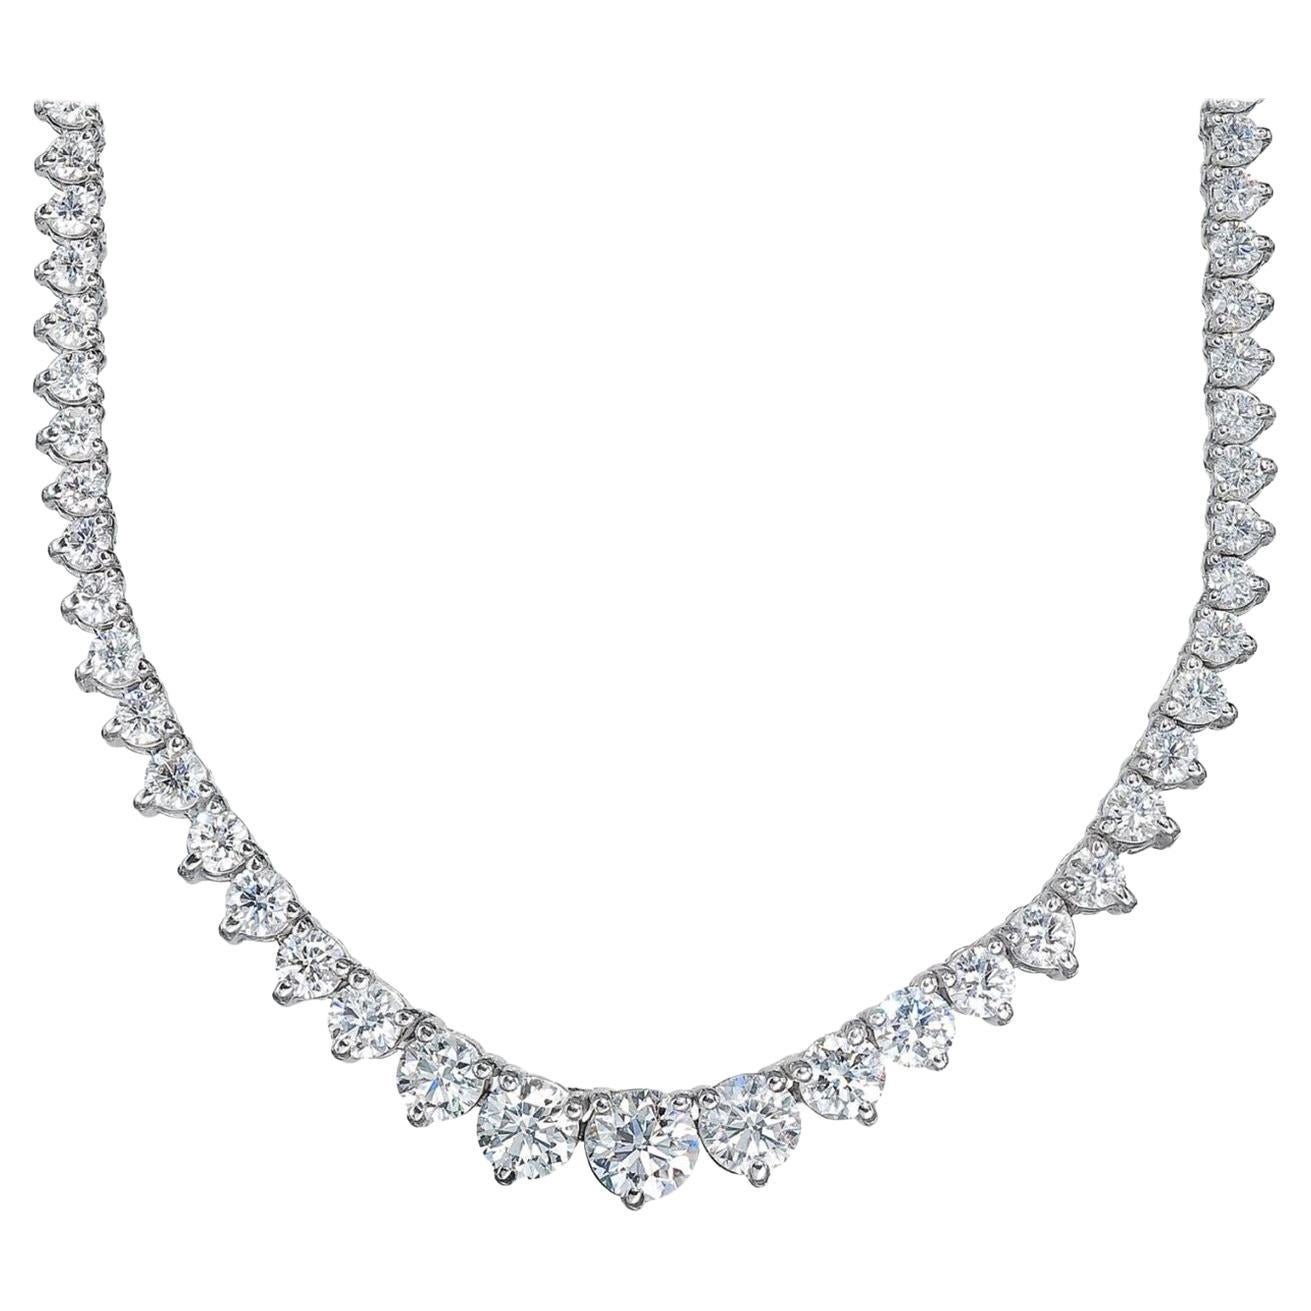 Graduated Tennis Necklace in with 3-Prong Set Round Diamonds